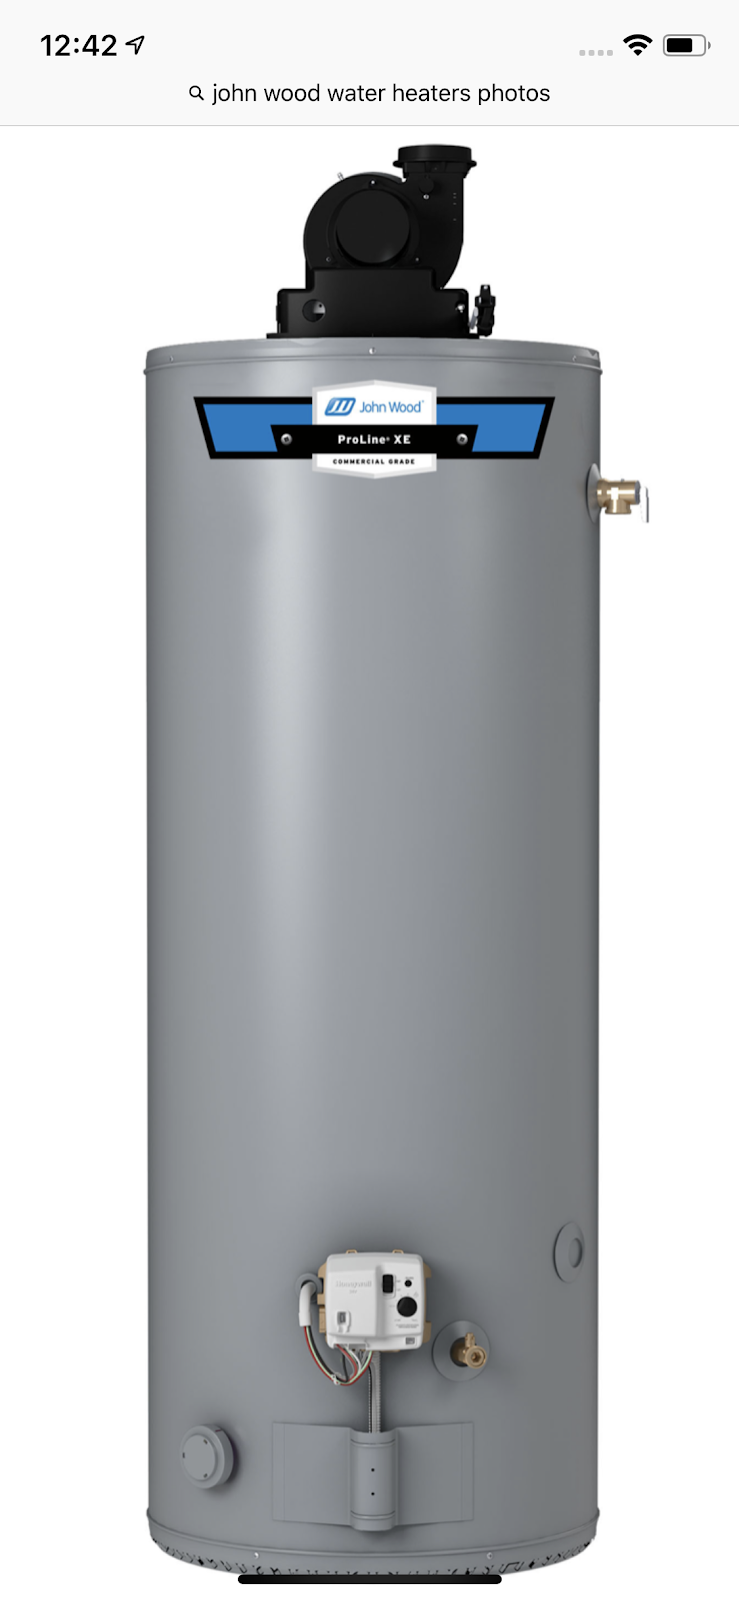 Wholesale Water Heaters | 10527 90 St NW, Edmonton, AB T5H 4E7, Canada | Phone: (780) 504-7899